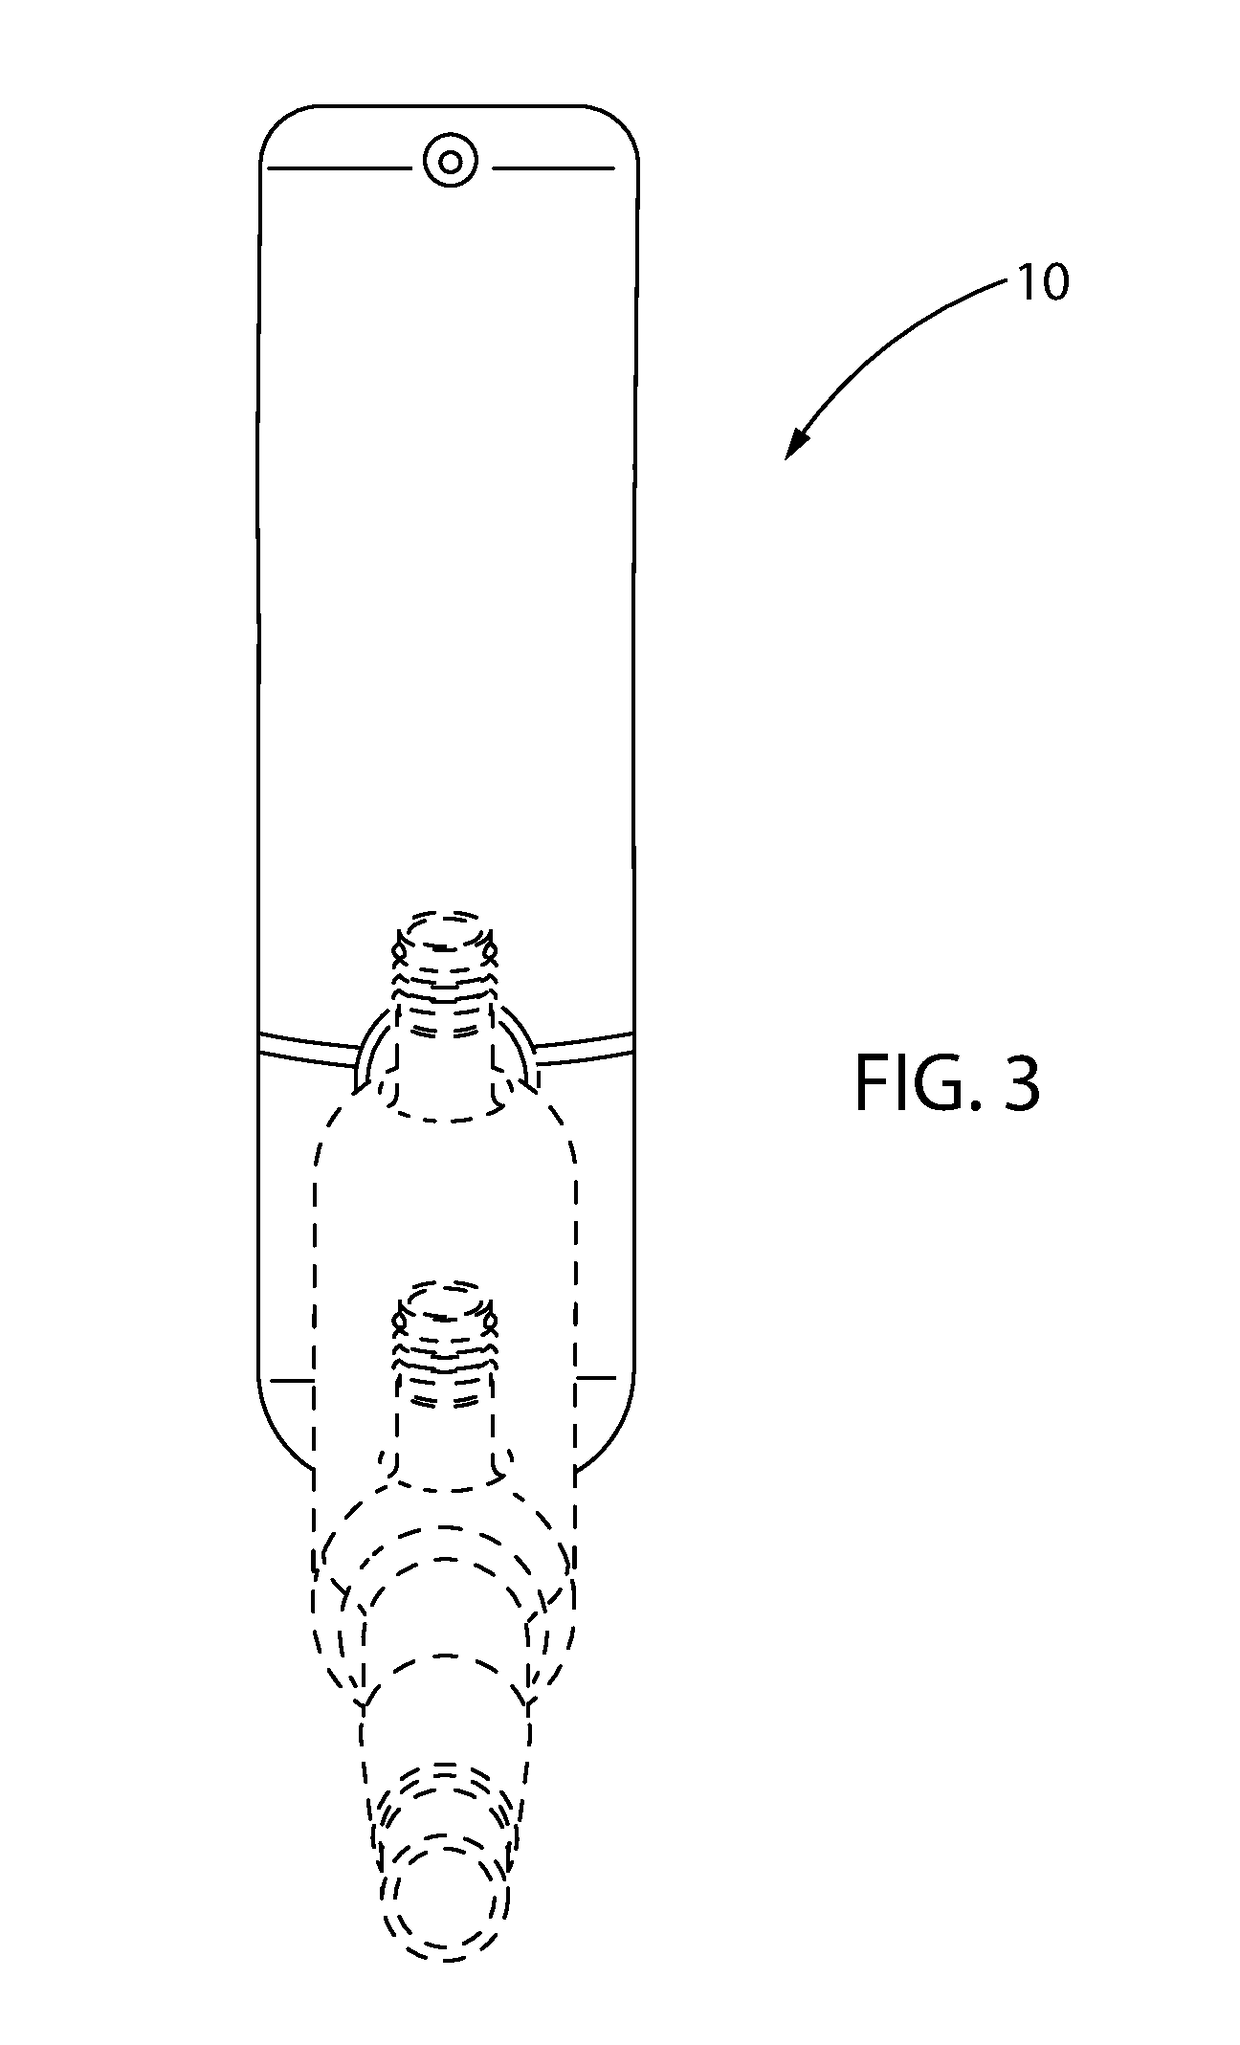 High efficiency distillation head and methods of use